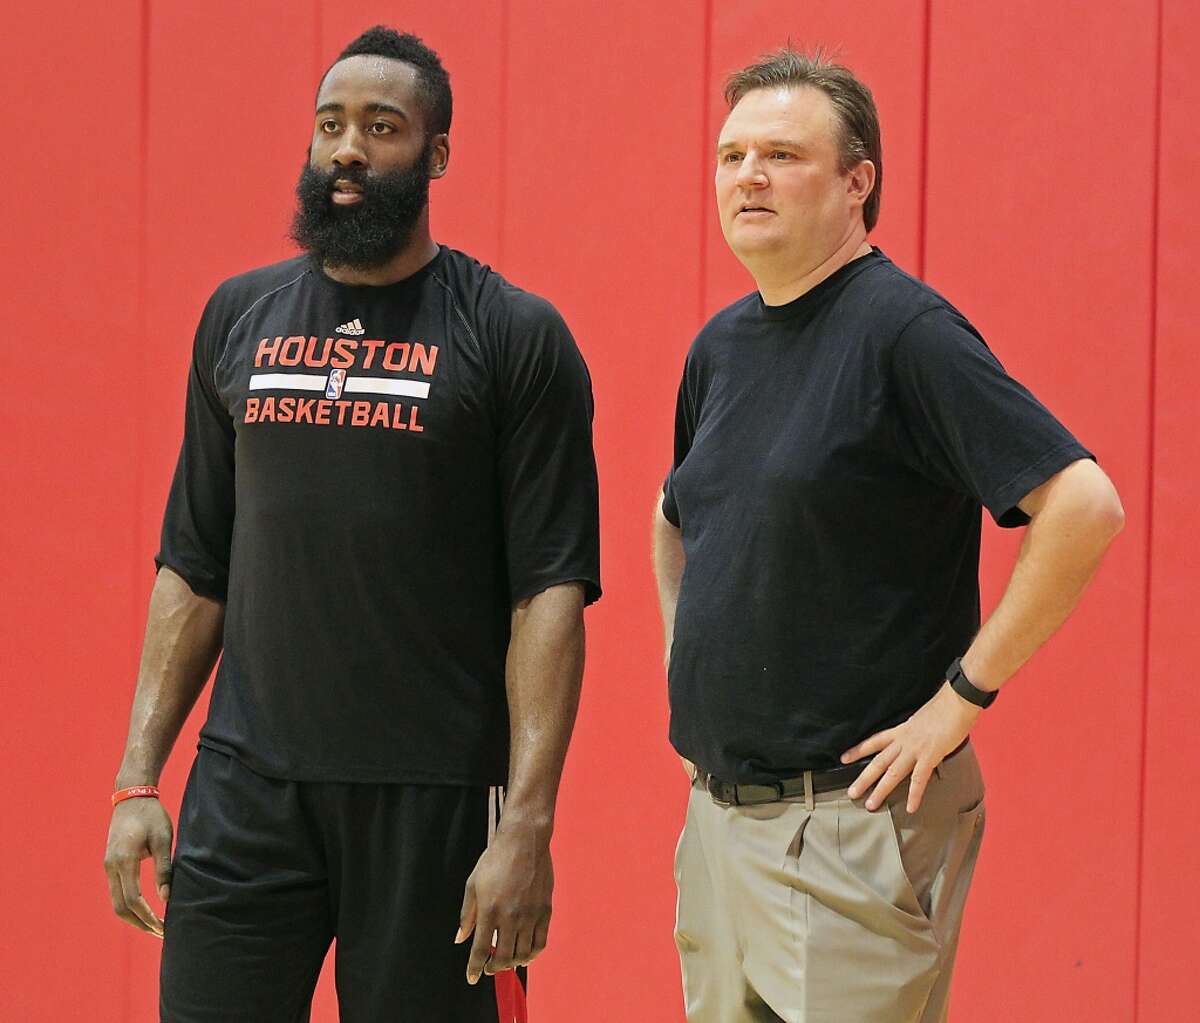 Harden-Morey feud reminds us of other rifts in NBA, MLB and NFL - ESPN